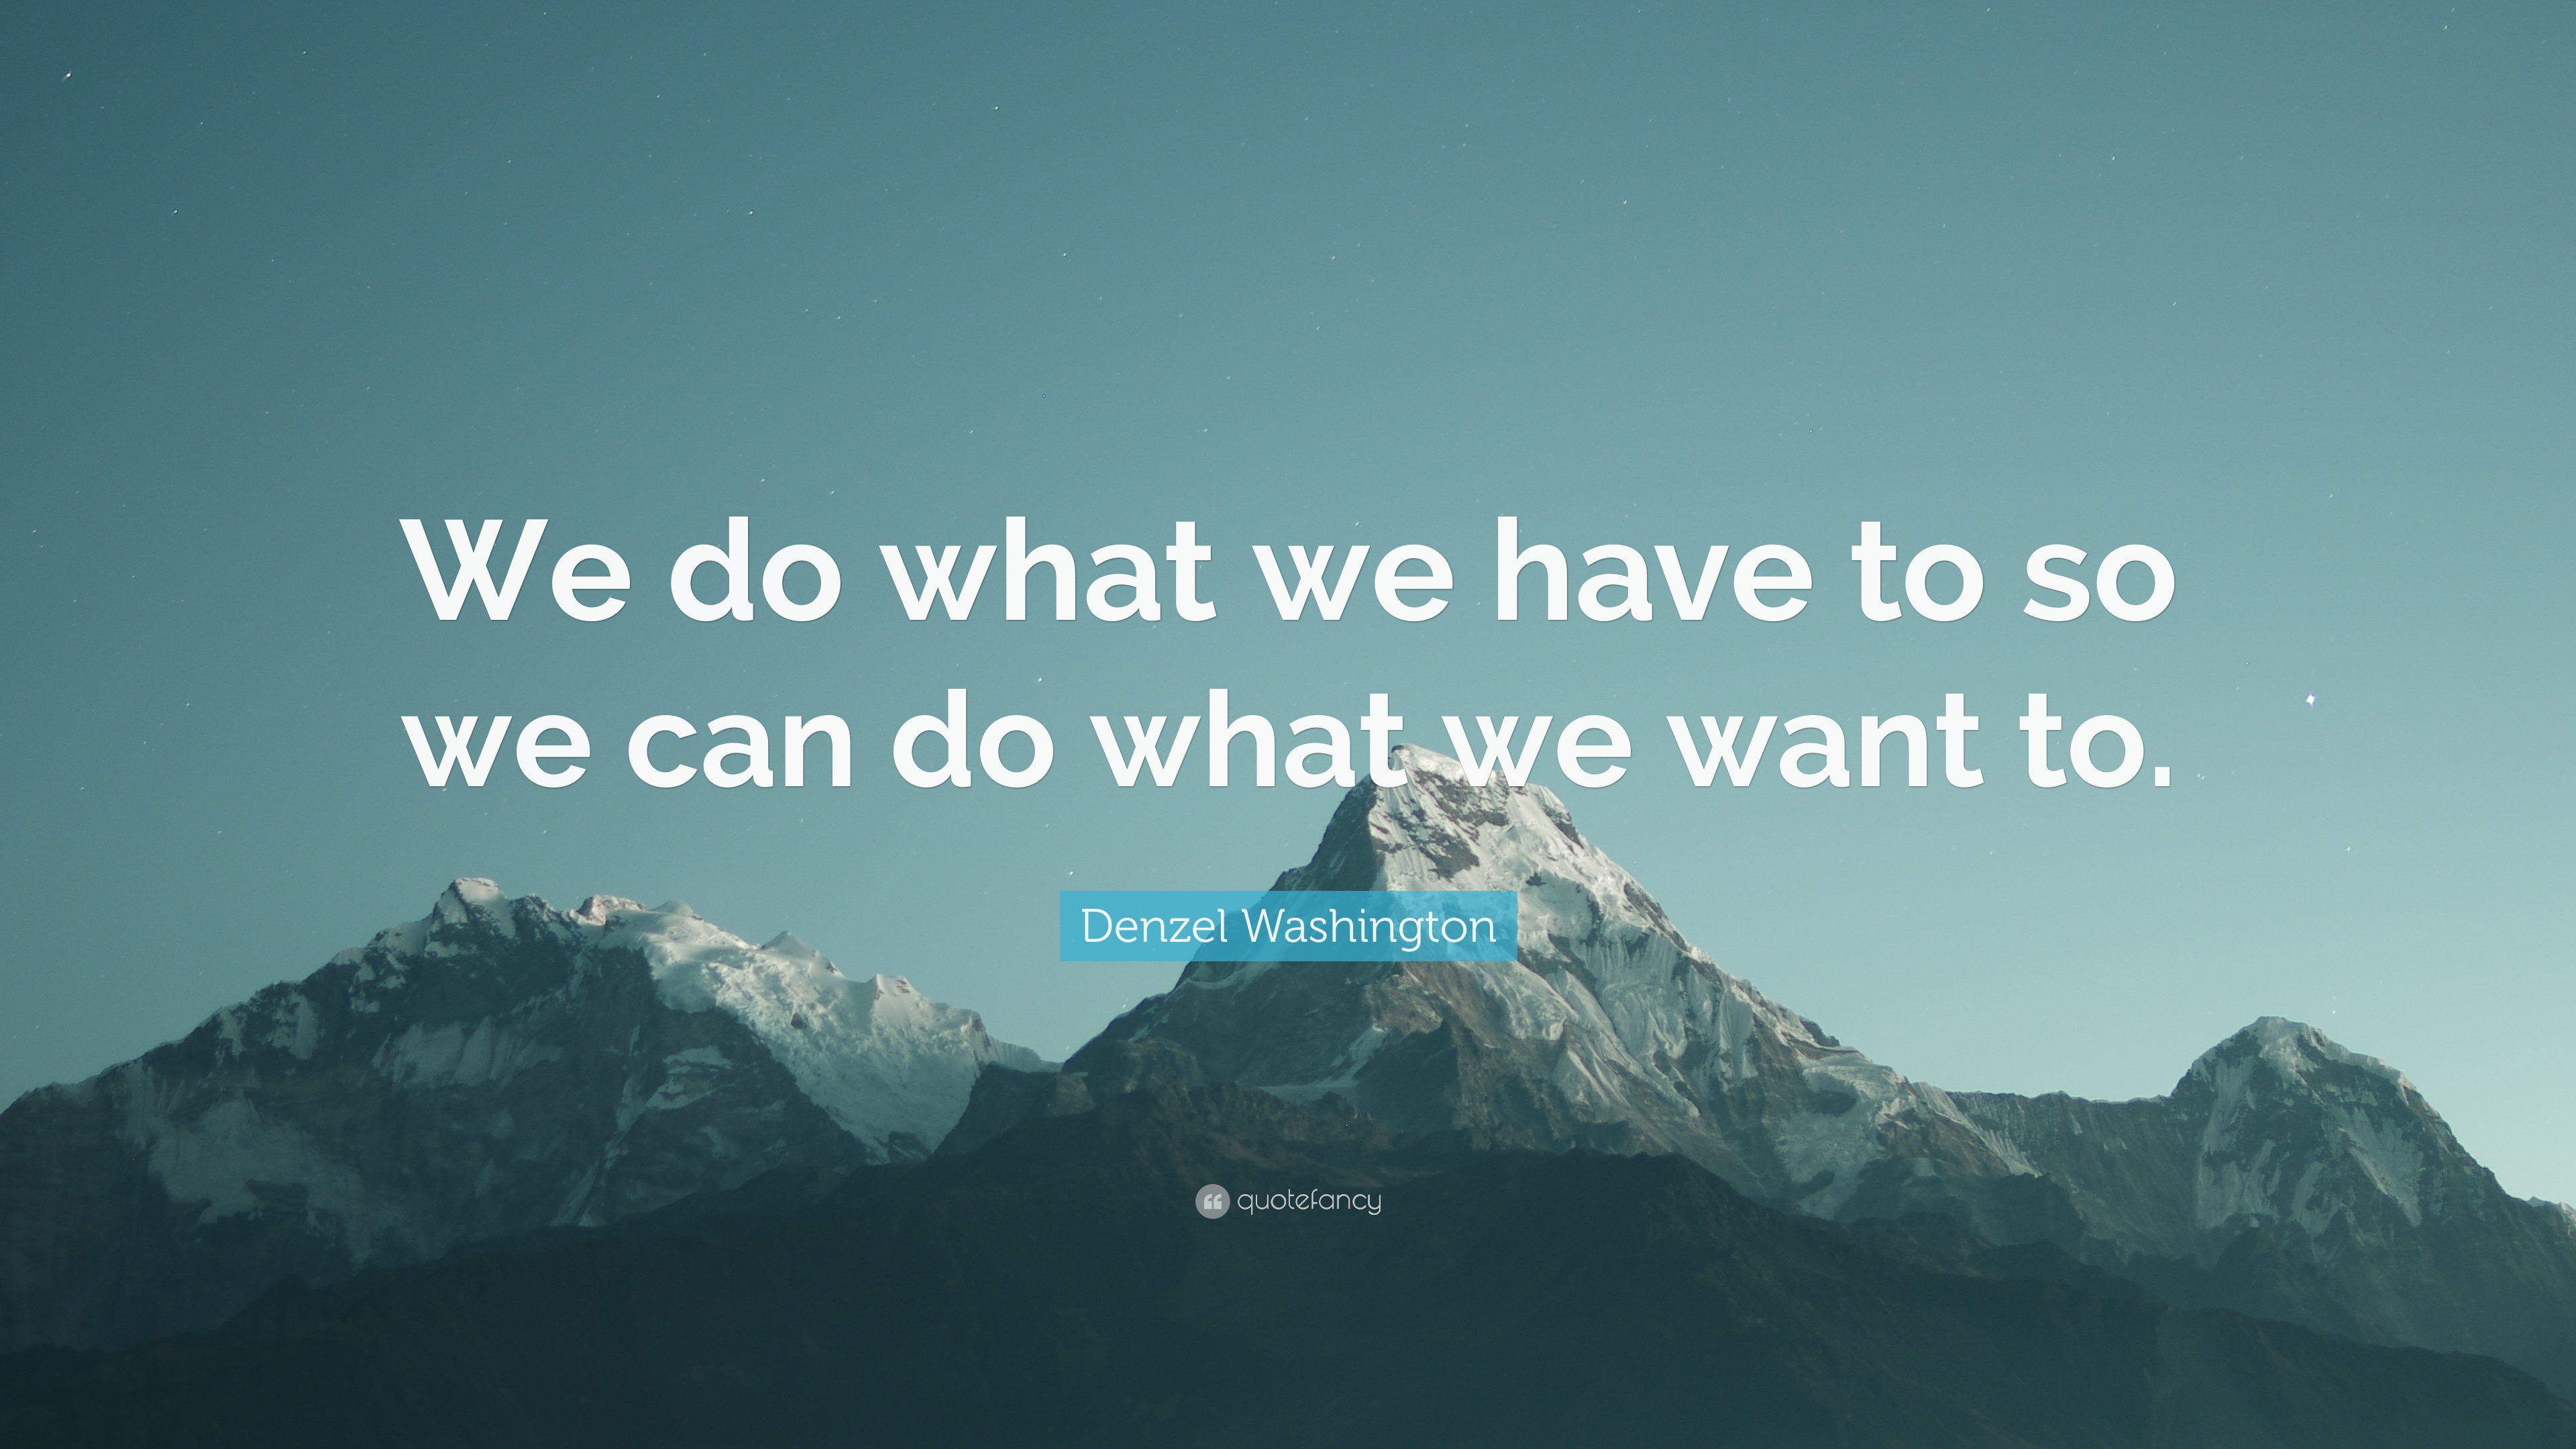 Denzel Washington Quote: “We do what we have to so we can do what we want